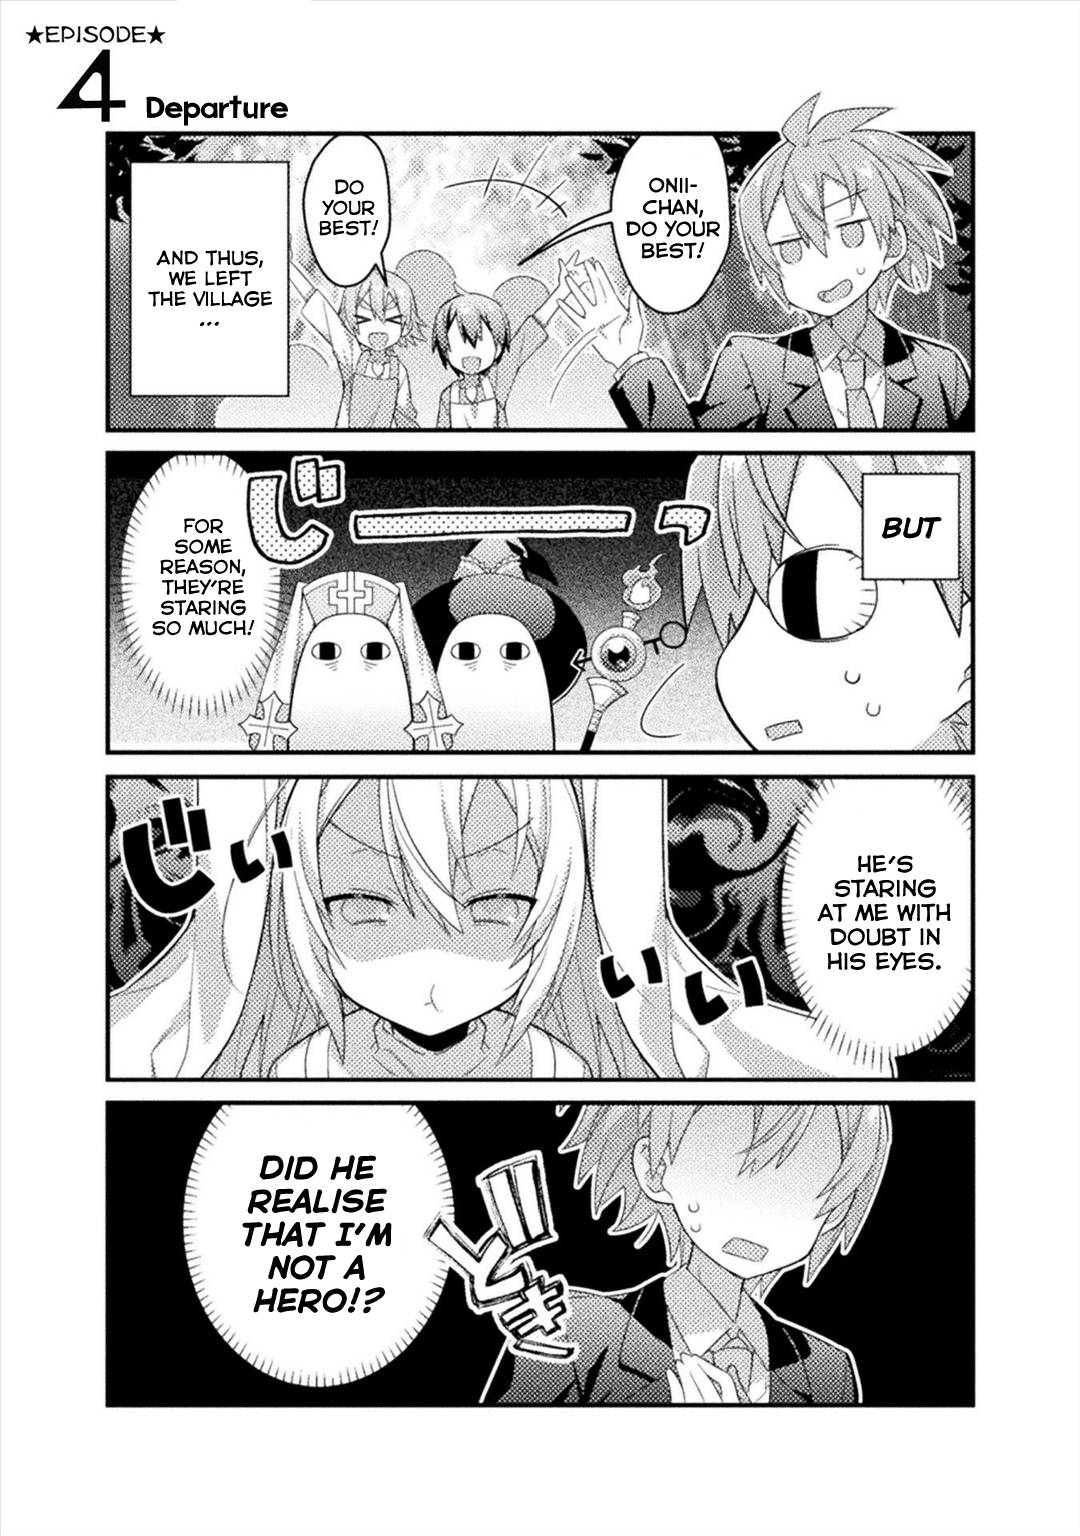 After Reincarnation, My Party Was Full Of Boys, But I'm Not A Shotacon! - chapter 4 - #3